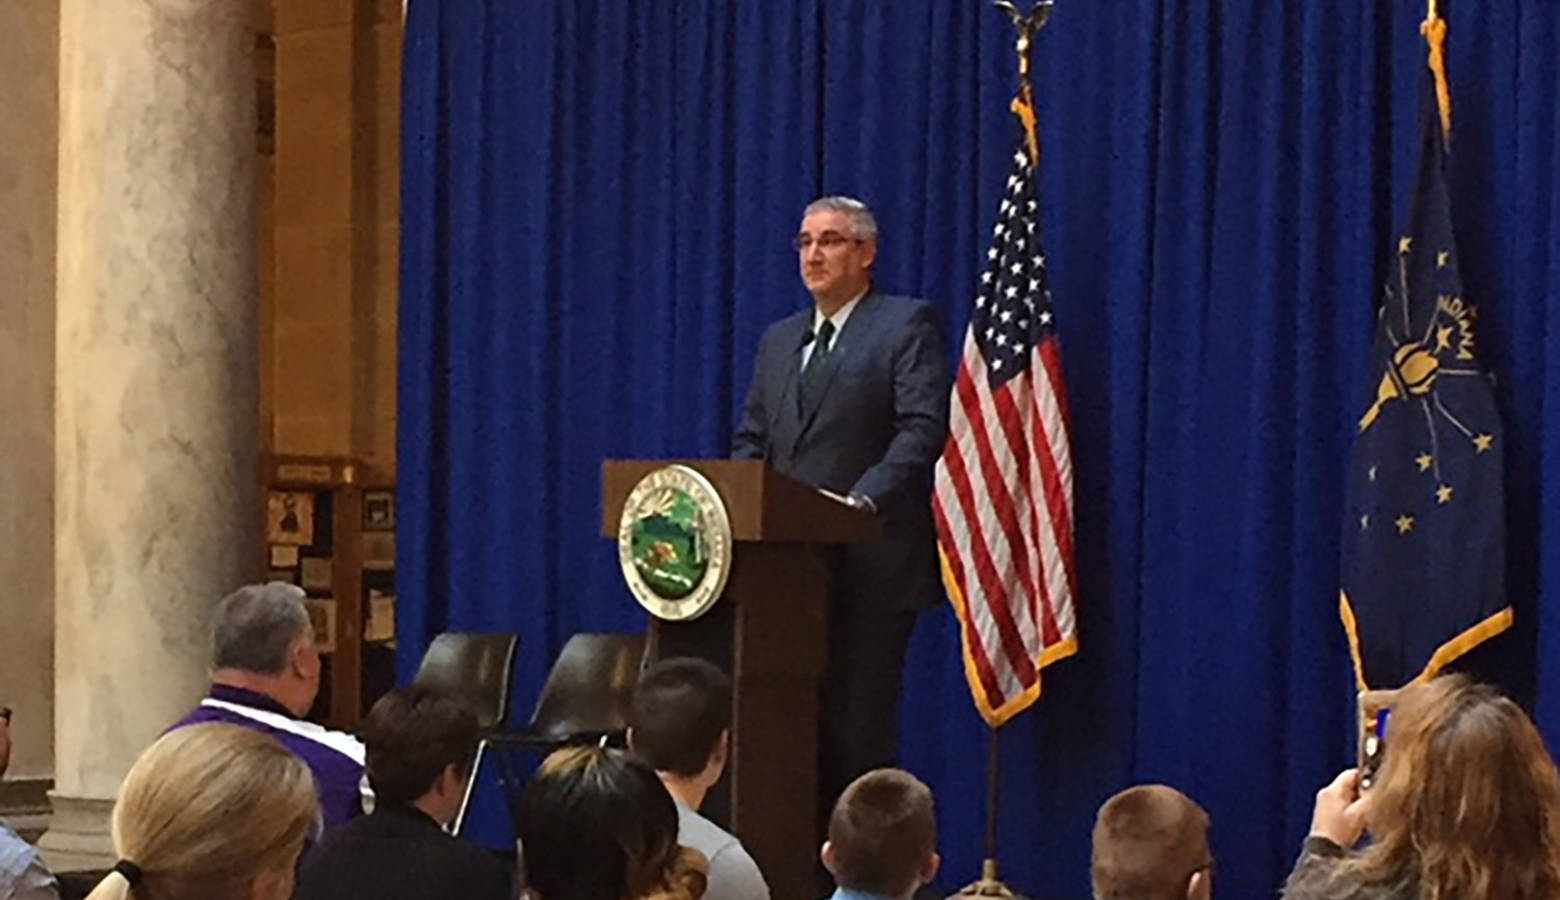 Gov. Eric Holcomb speaks to foster families at the Statehouse. (Jill Sheridan/IPB News)